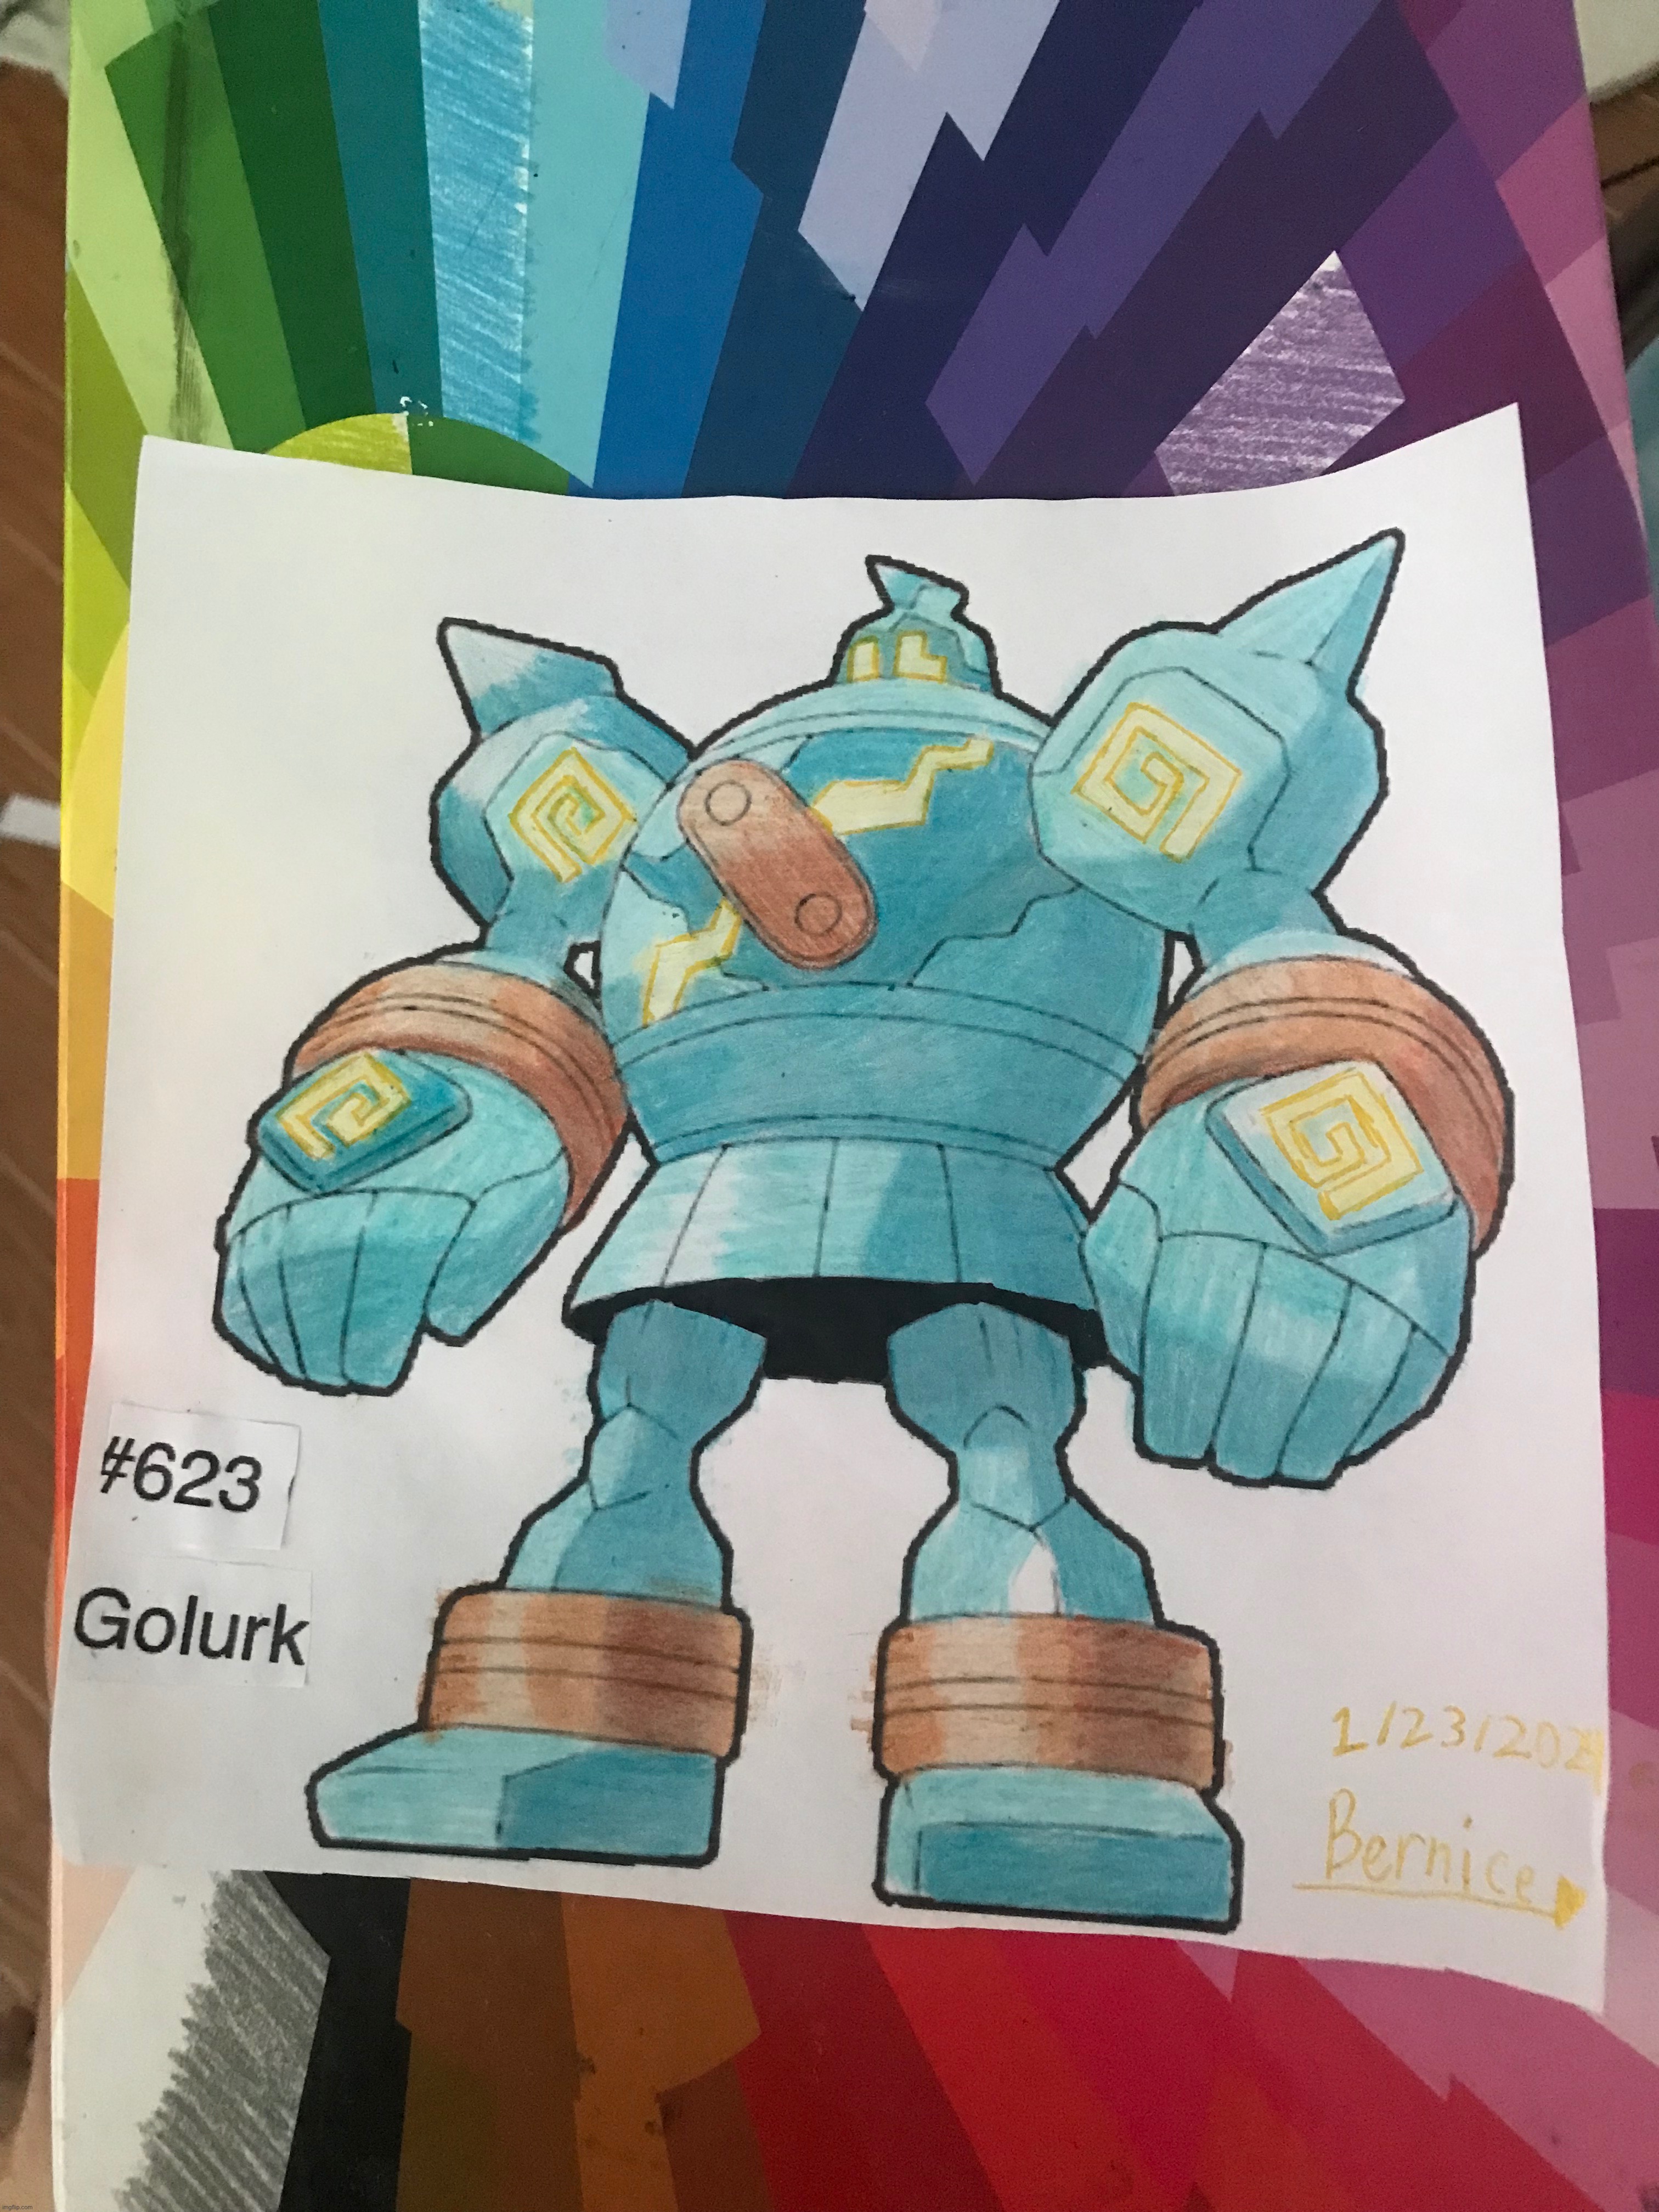 Golurk! (gift for Your-Average-Golurk because he's taking a break) | image tagged in art | made w/ Imgflip meme maker